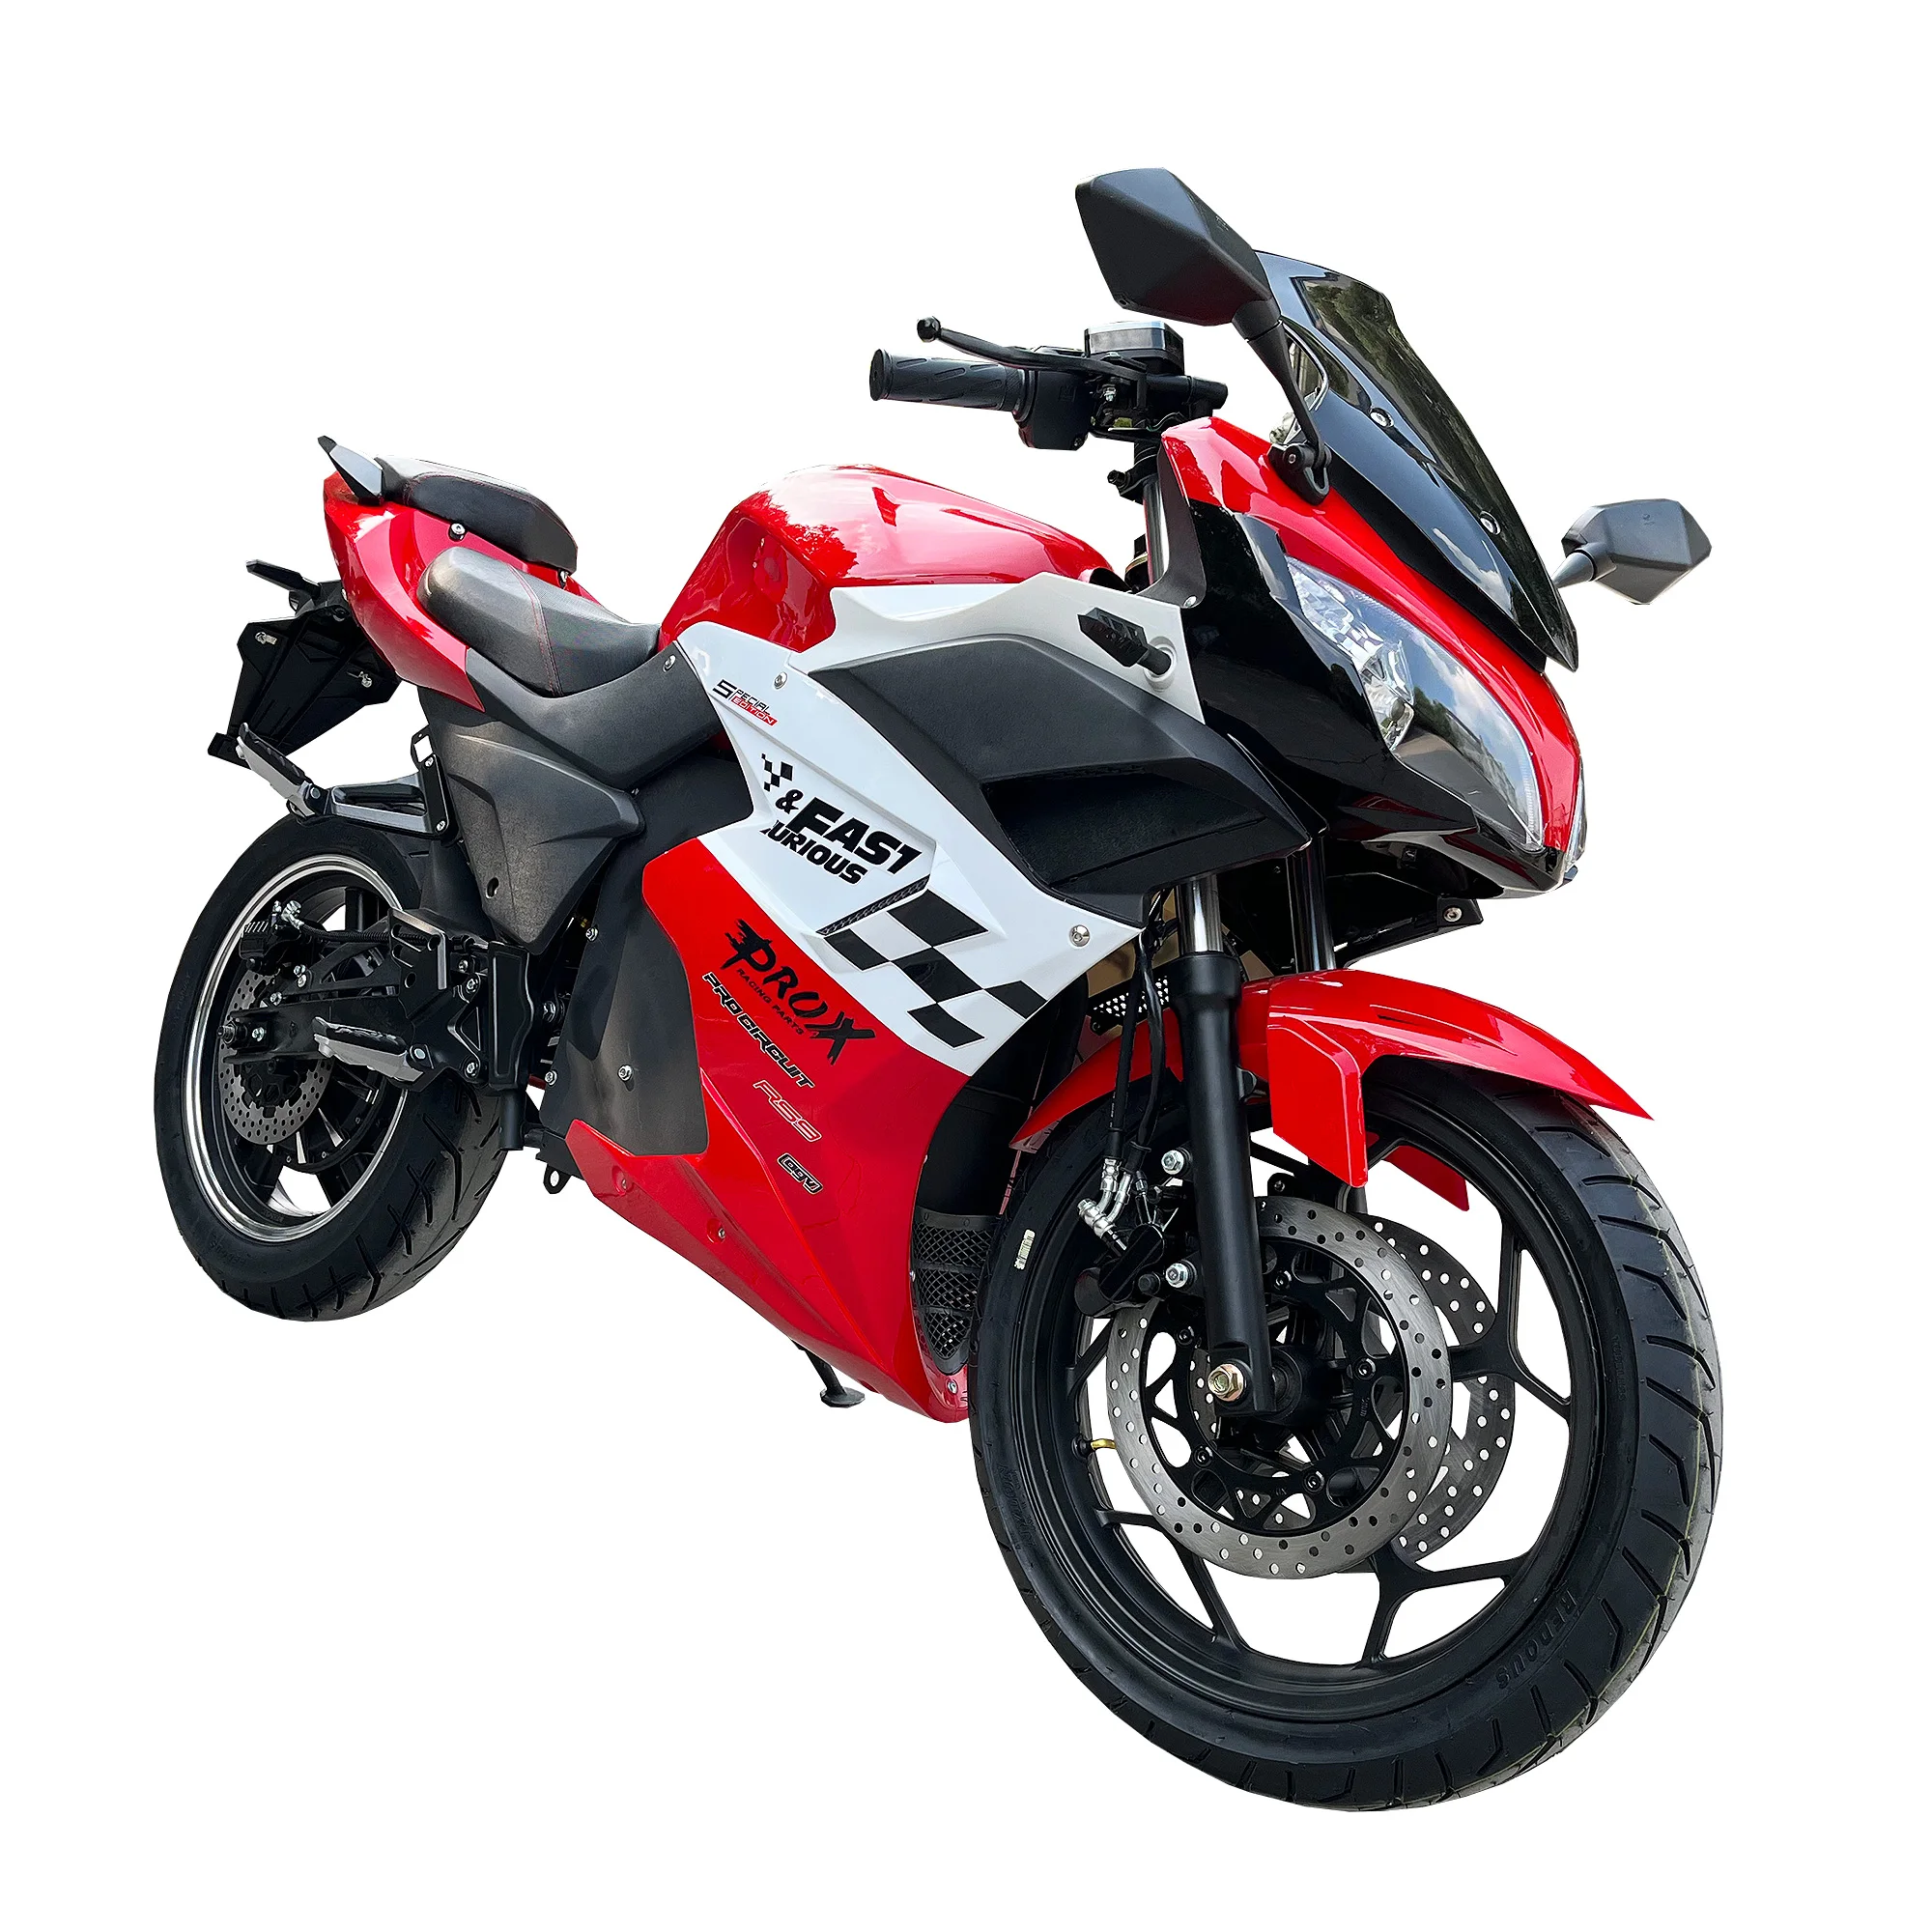 Speed motorbike 120km/h 10000w hub motor electric motorcycle with factory price unique innovation high speed 3000w 5000w 8000w 10000w electric motorcycle with disc brakes for adult